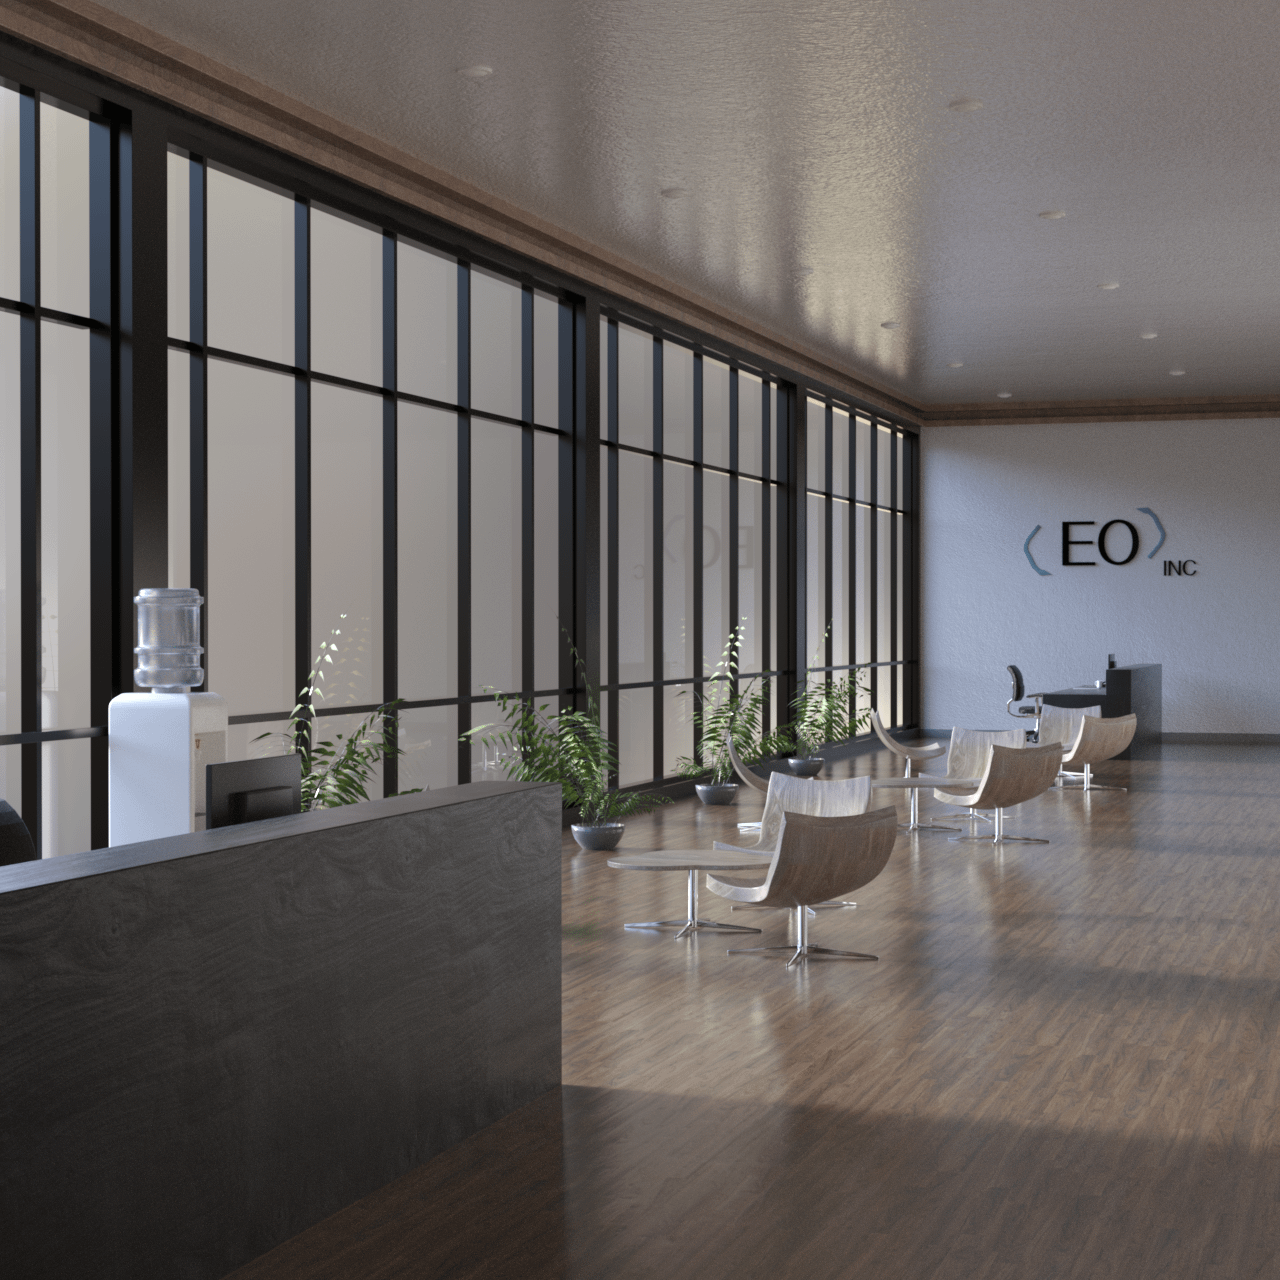 3d model of an office entrance area